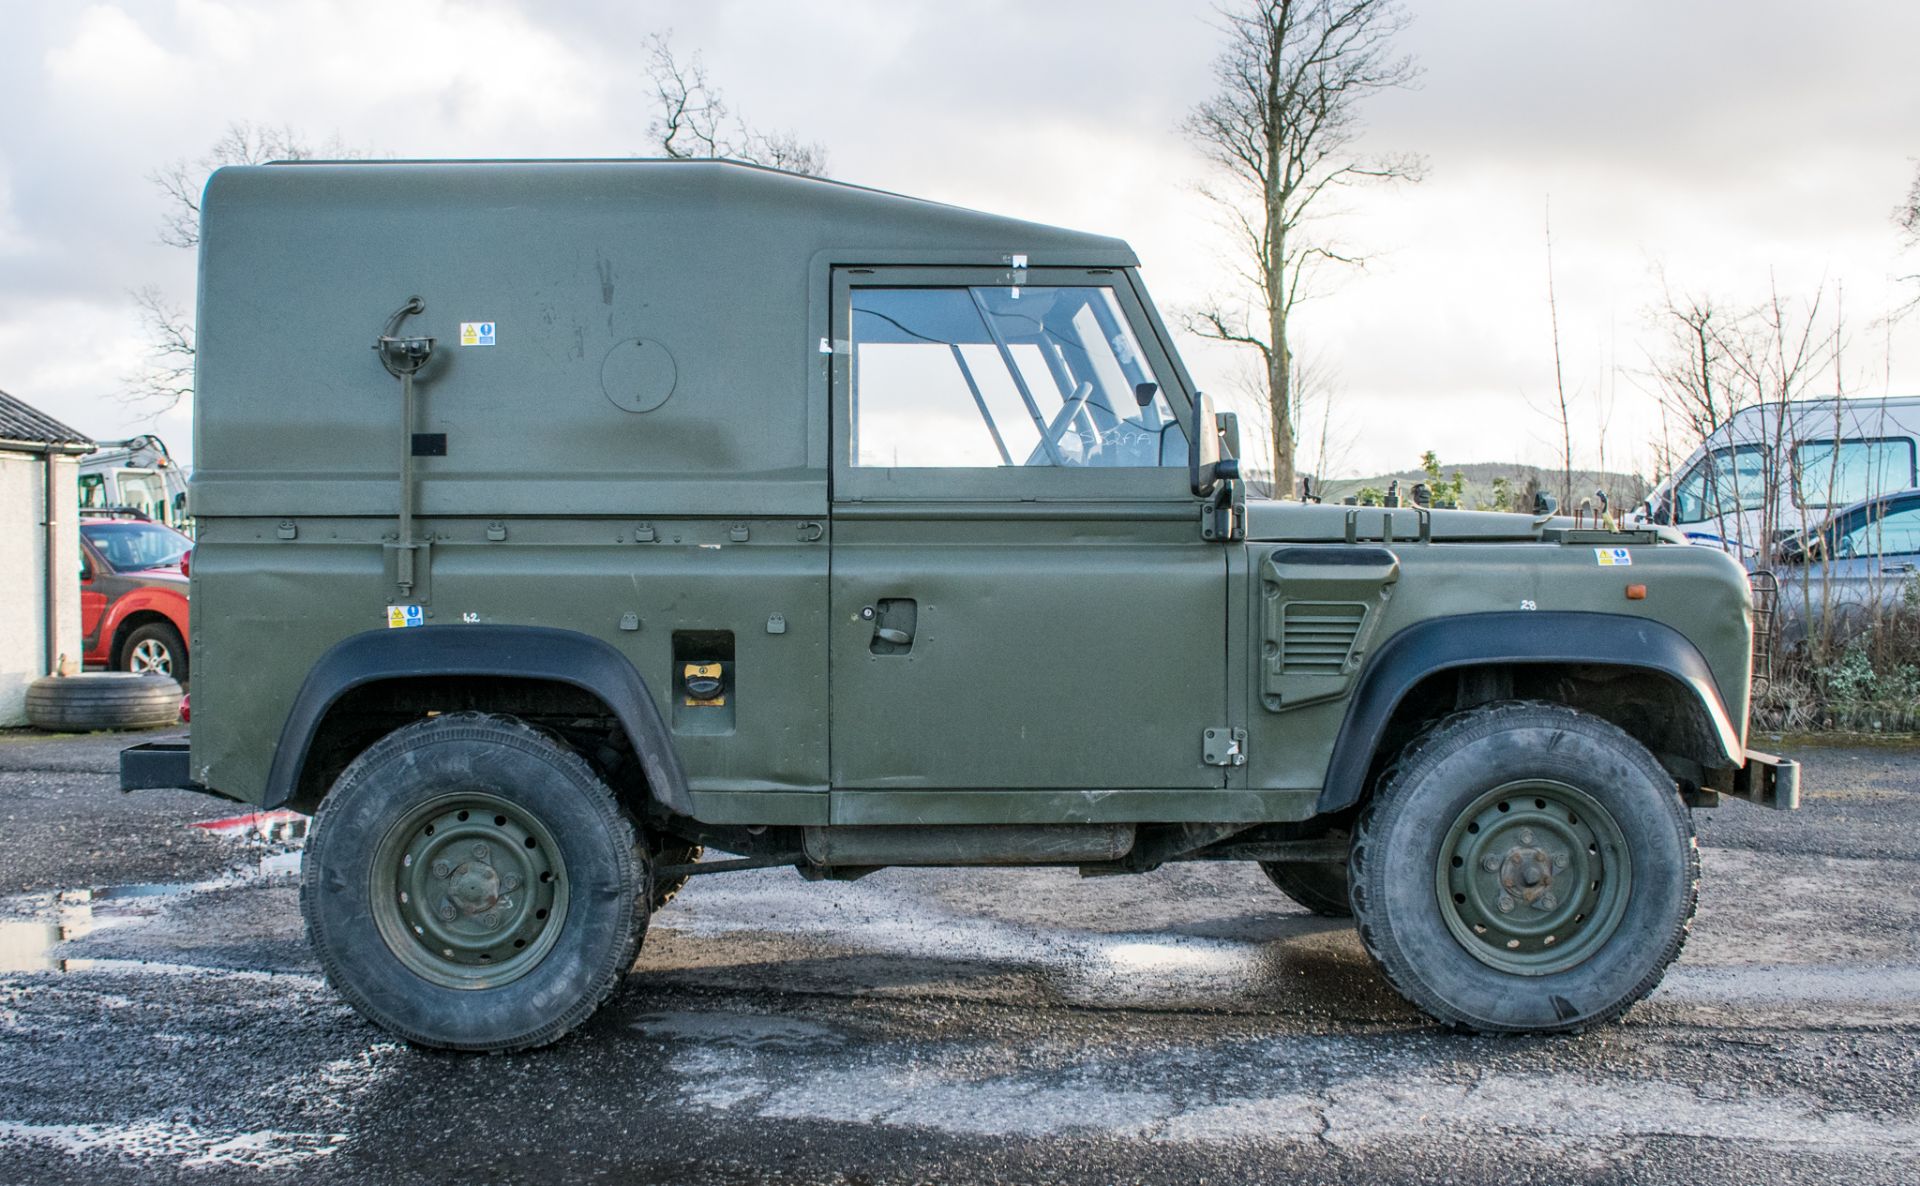 Land Rover Defender 90 Wolf 300 TDI 4wd TUL hard top utility vehicle (EX MOD) Date into Service: - Image 8 of 27